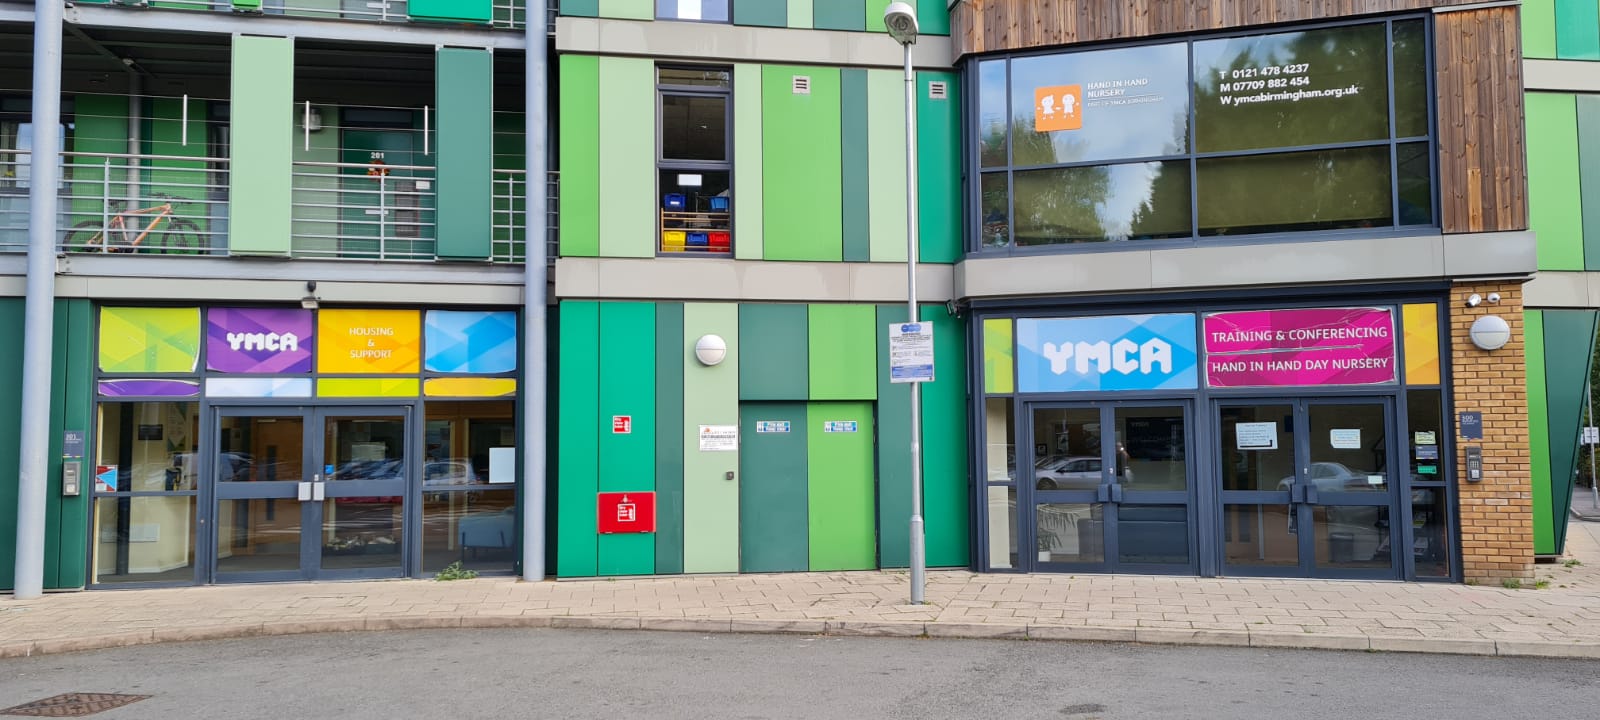 At the YMCA Birmingham an Idis Direct IP solution comprising a 32-channel NVR; 19 full-HD vandal-resistant IR domes; and 11 full-HD IR bullet cameras were installed.